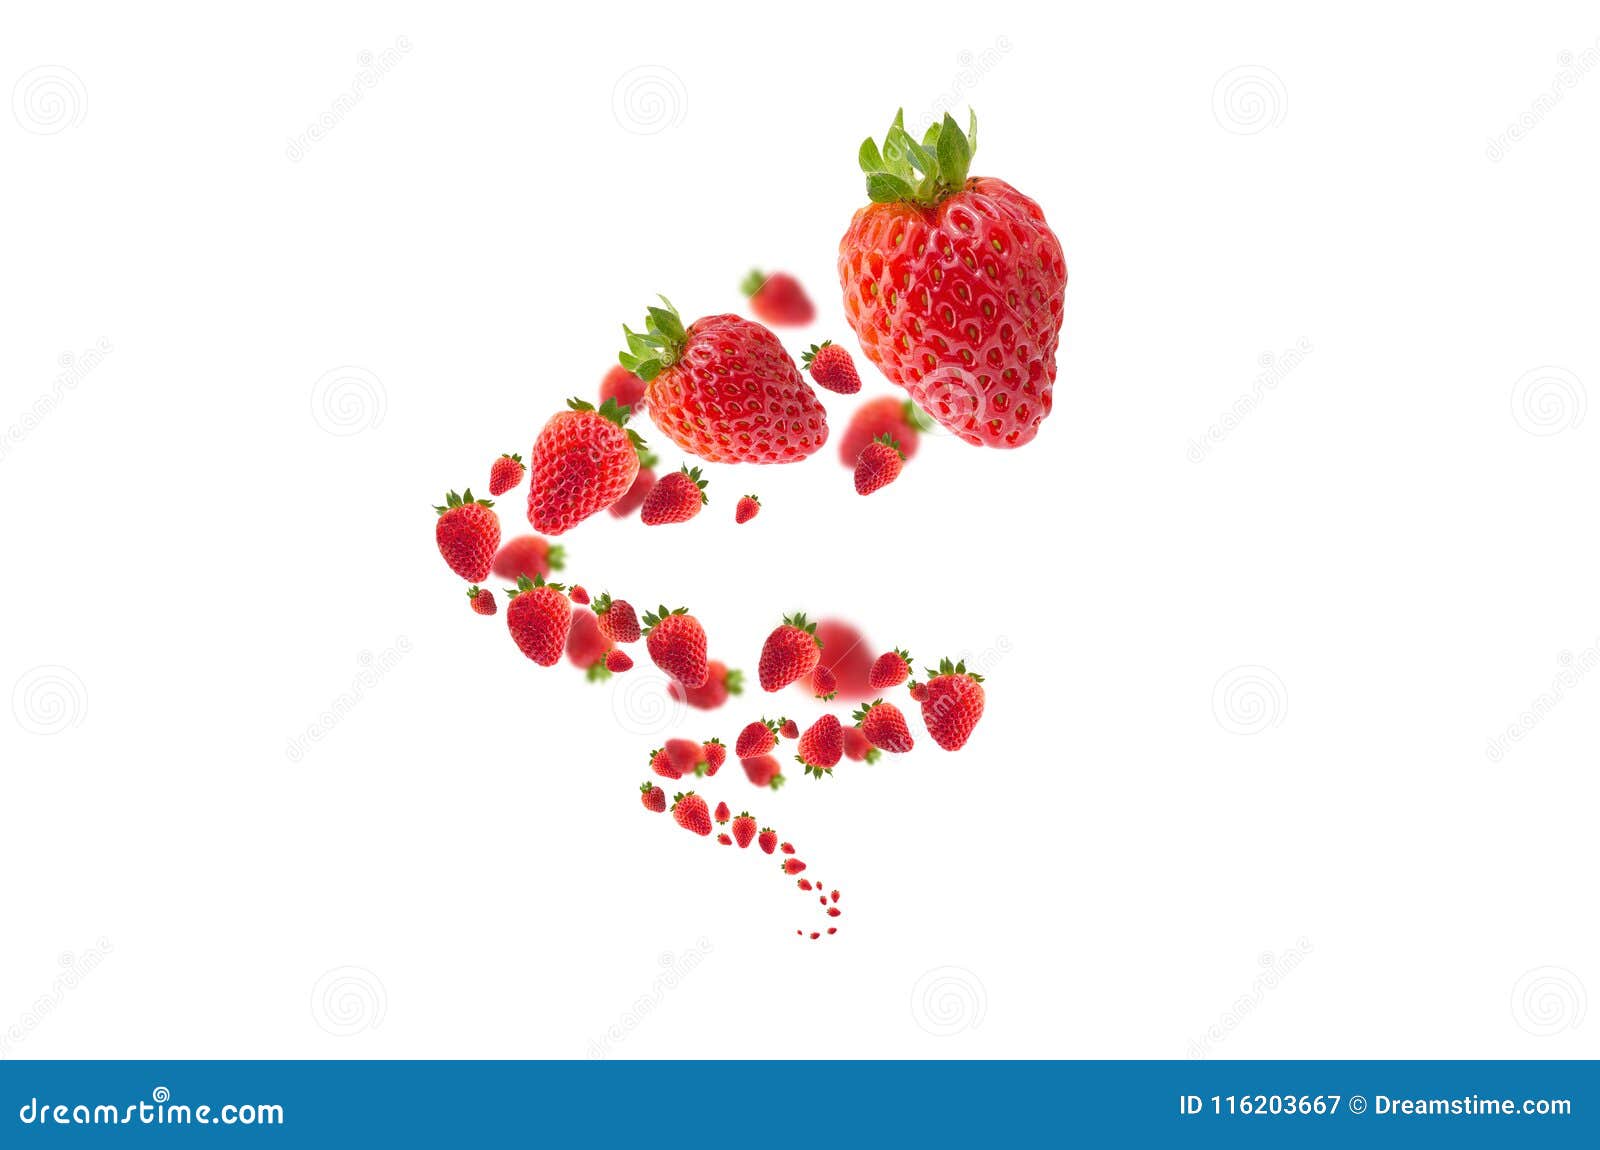 strawberries with effect on white background for backgrounds